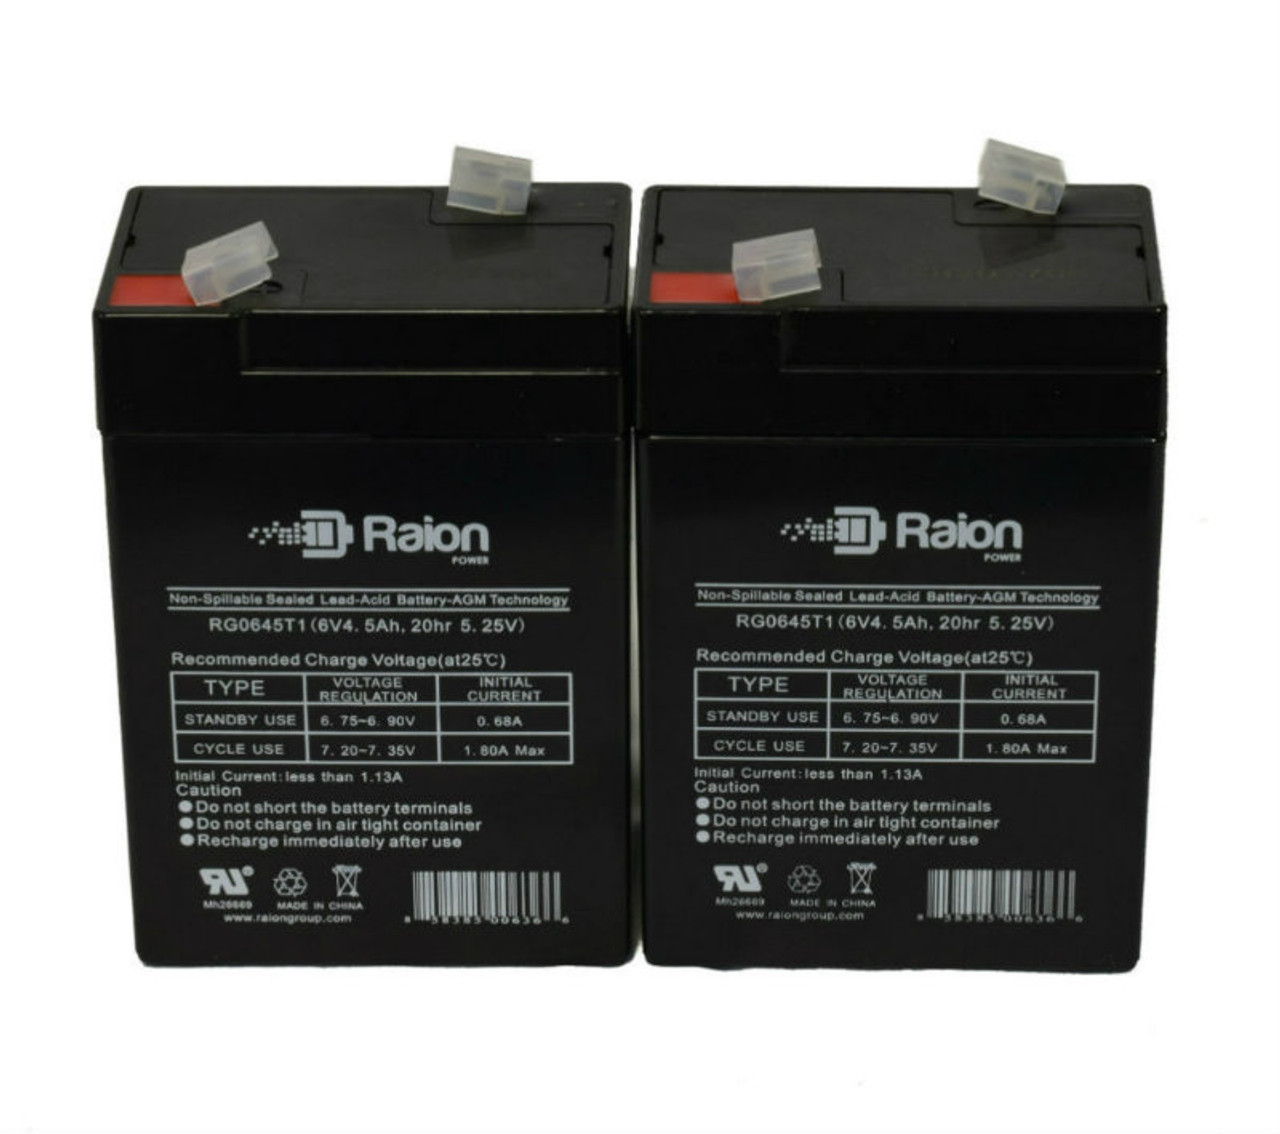 Raion Power 6 Volt 4.5Ah RG0645T1 Replacement Battery for CGB CB640 - 2 Pack